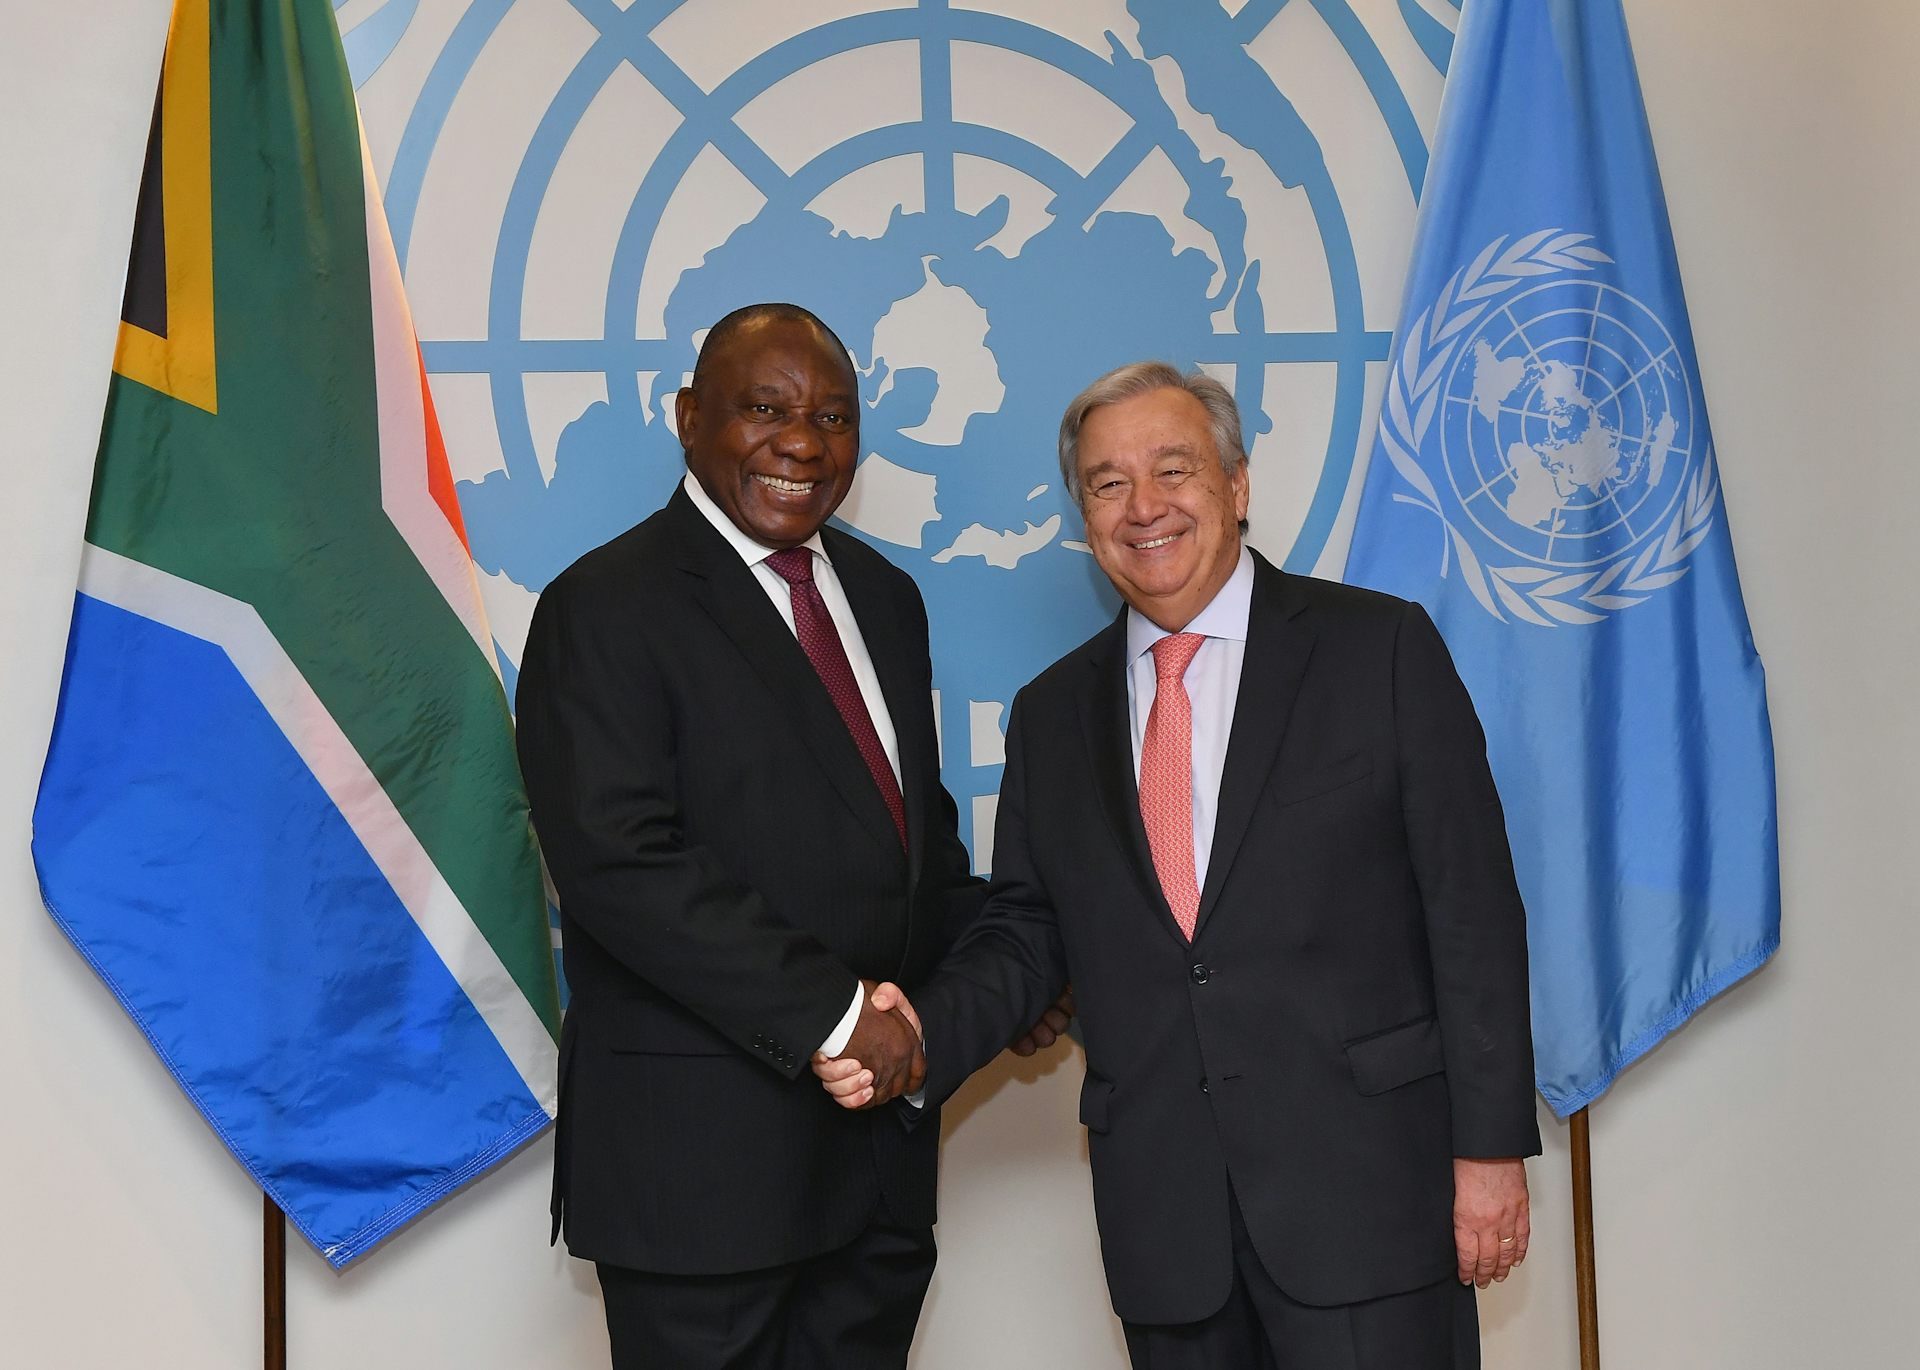 South Africa Returns to Un Security Council: Here’s the Role It Should Play